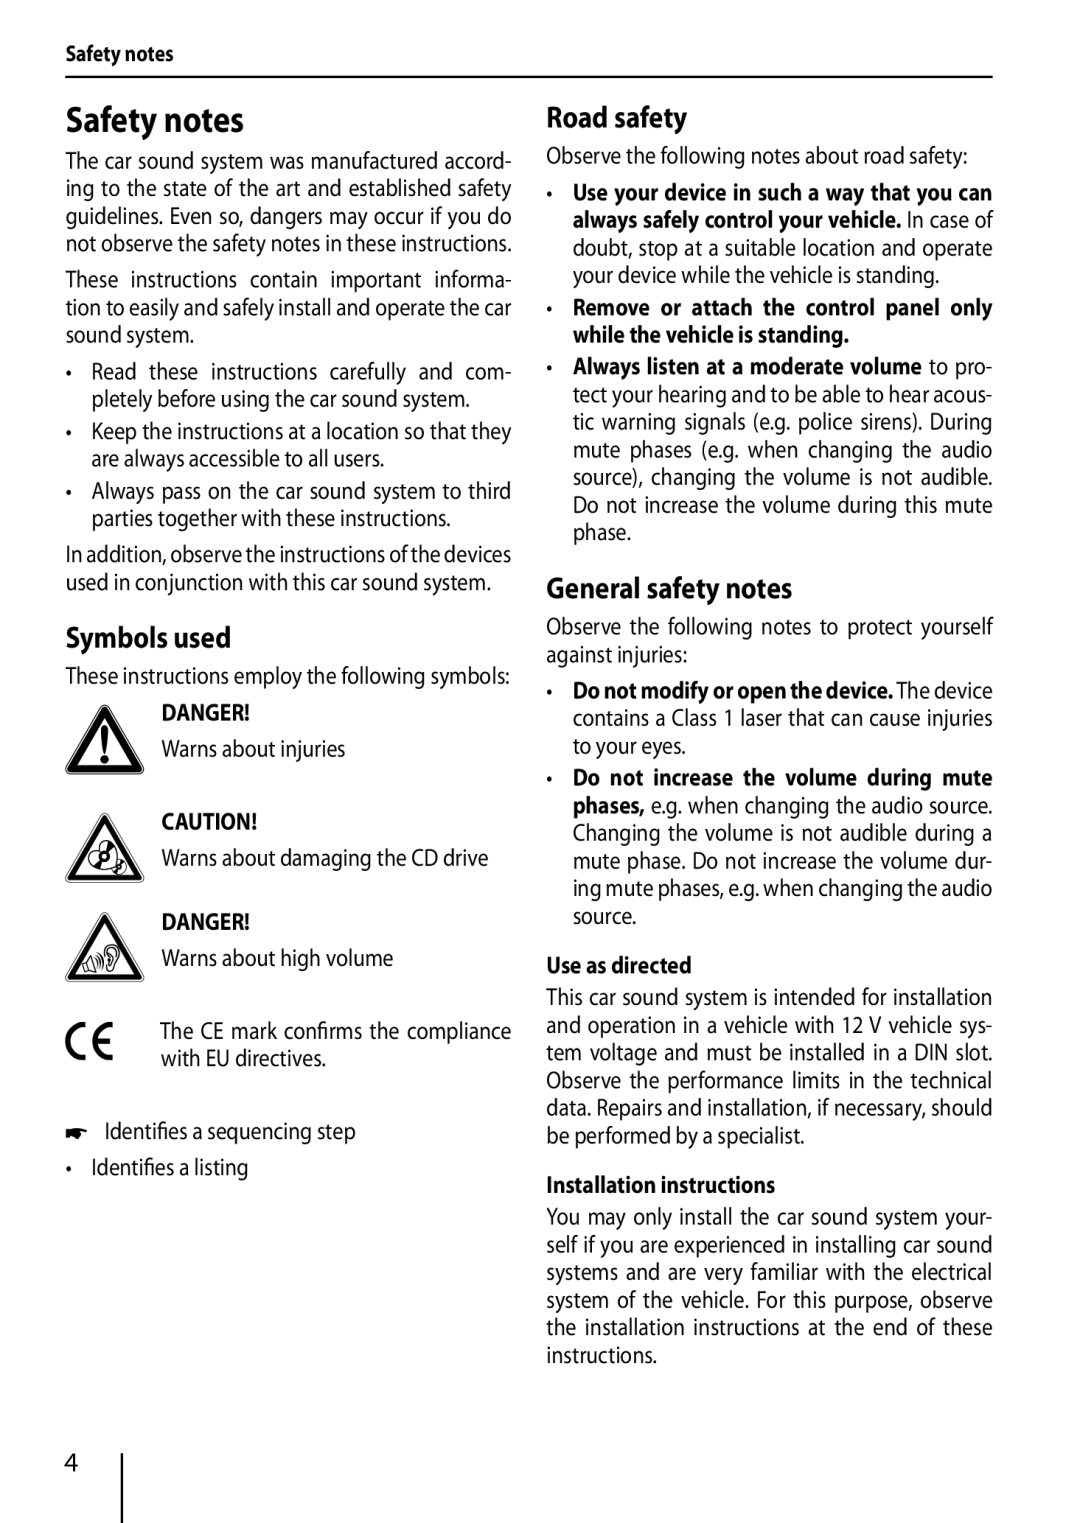 Blaupunkt TRUE Safety notes, Symbols used, Road safety, General safety notes, Danger, Use as directed 